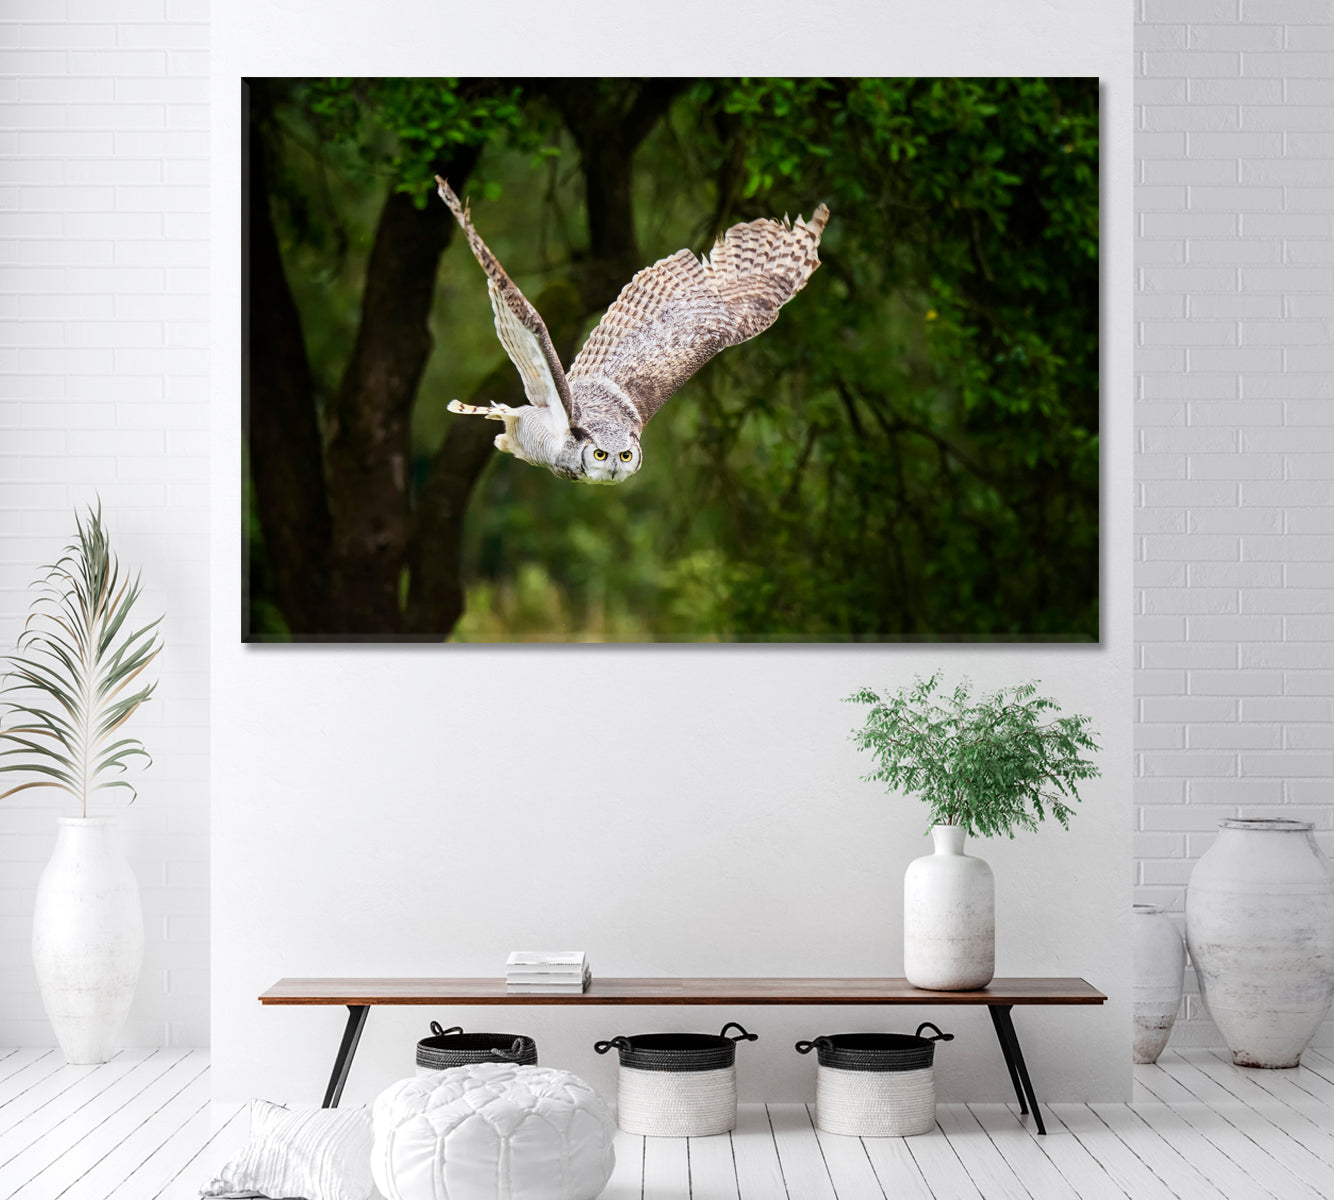 Great Horned Owl flying in Forest Canvas Print ArtLexy 1 Panel 24"x16" inches 